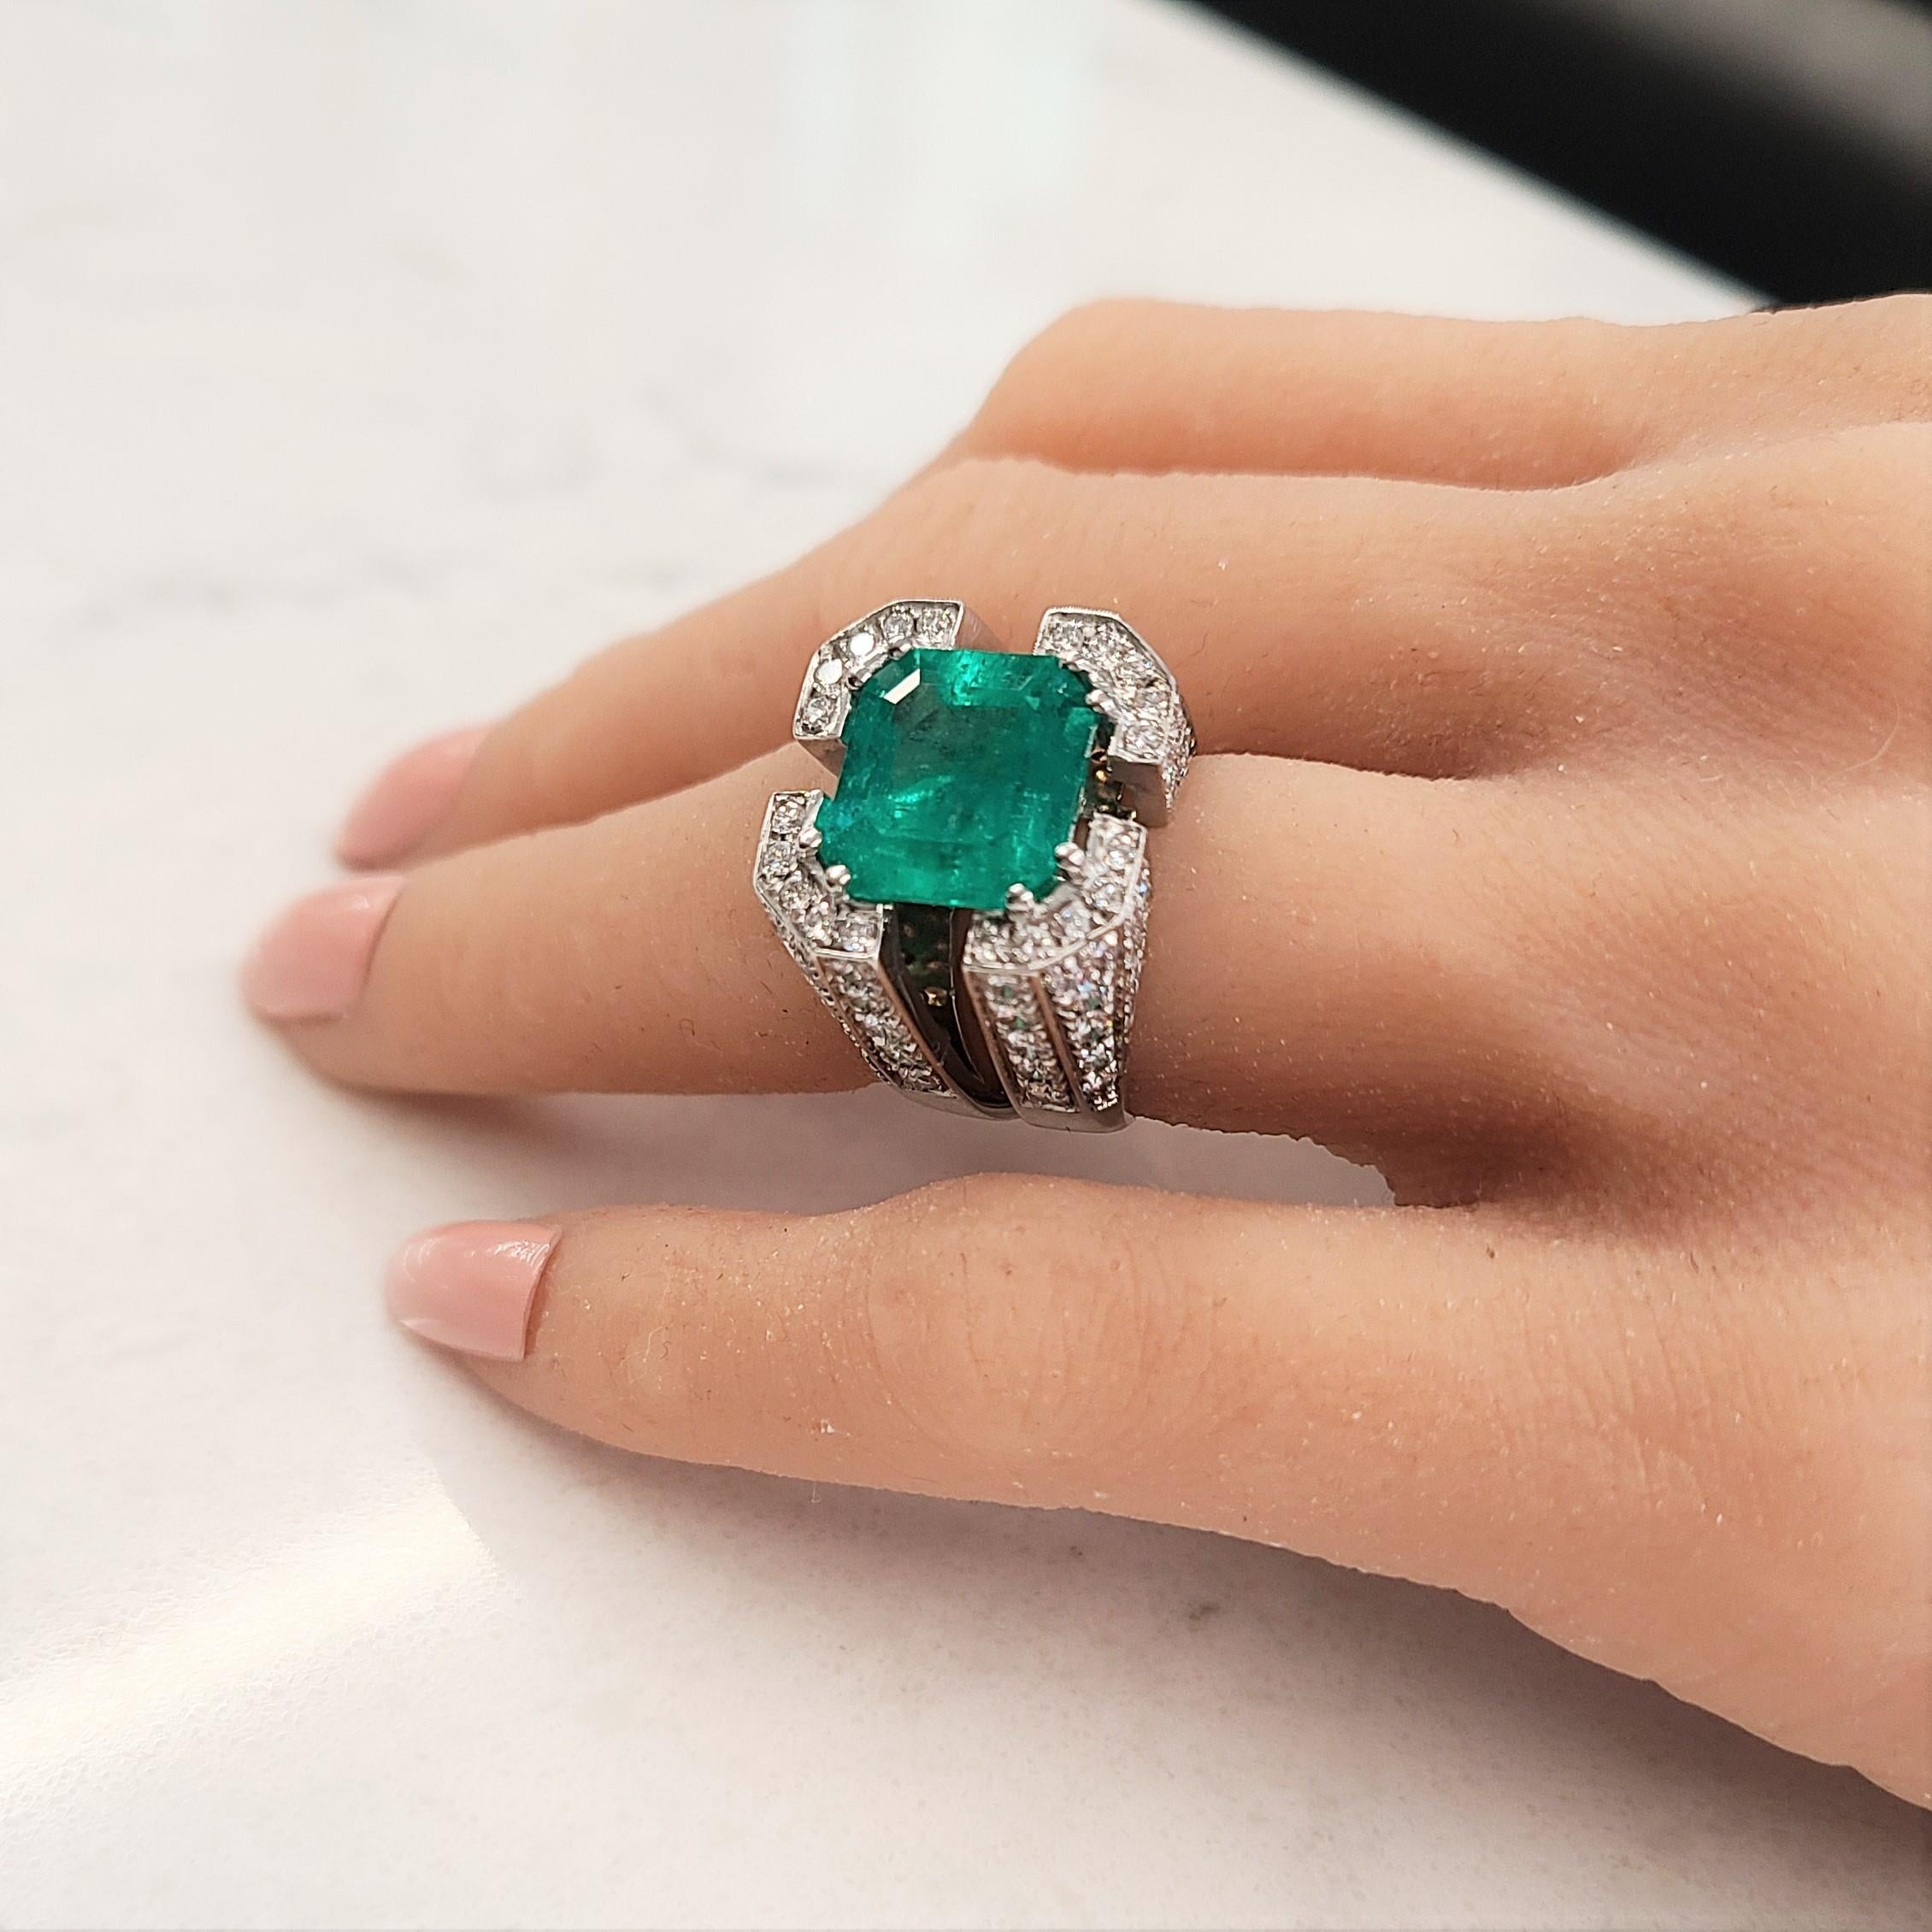 Make an entrance with this brightly polished 18k white gold cocktail anniversary ring. This stunning ring features a square cut PGS CERTIFIED fine quality Columbian emerald that exhibits a lush green grass shade and weighs 7.18 carats. This emerald